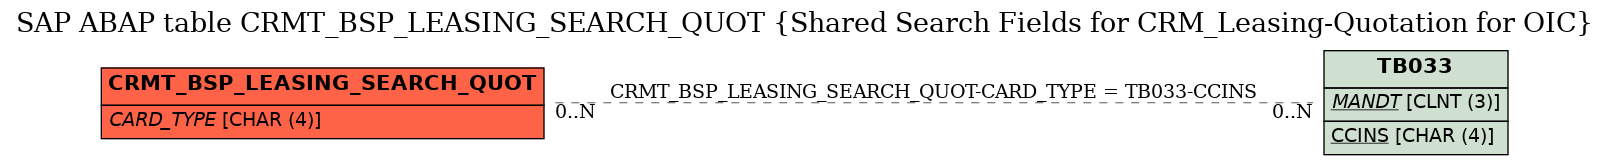 E-R Diagram for table CRMT_BSP_LEASING_SEARCH_QUOT (Shared Search Fields for CRM_Leasing-Quotation for OIC)